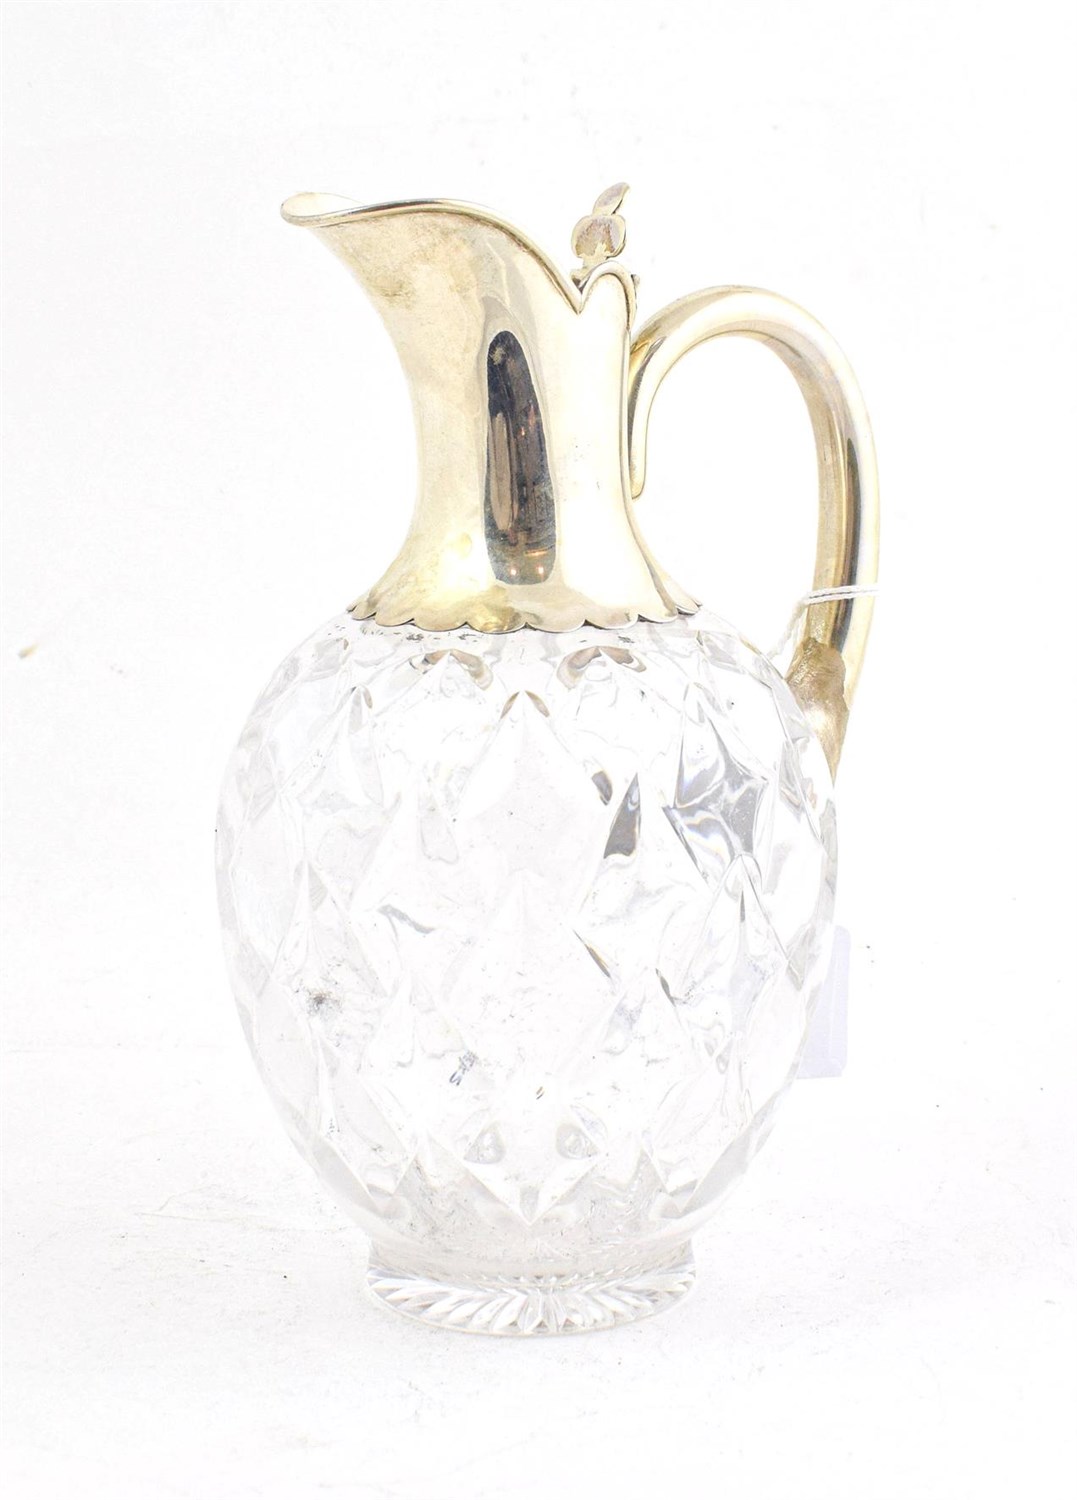 Lot 54 - A Victorian Silver-Mounted Glass Claret-Jug, by John Grinsell and Sons, London, 1897. The...